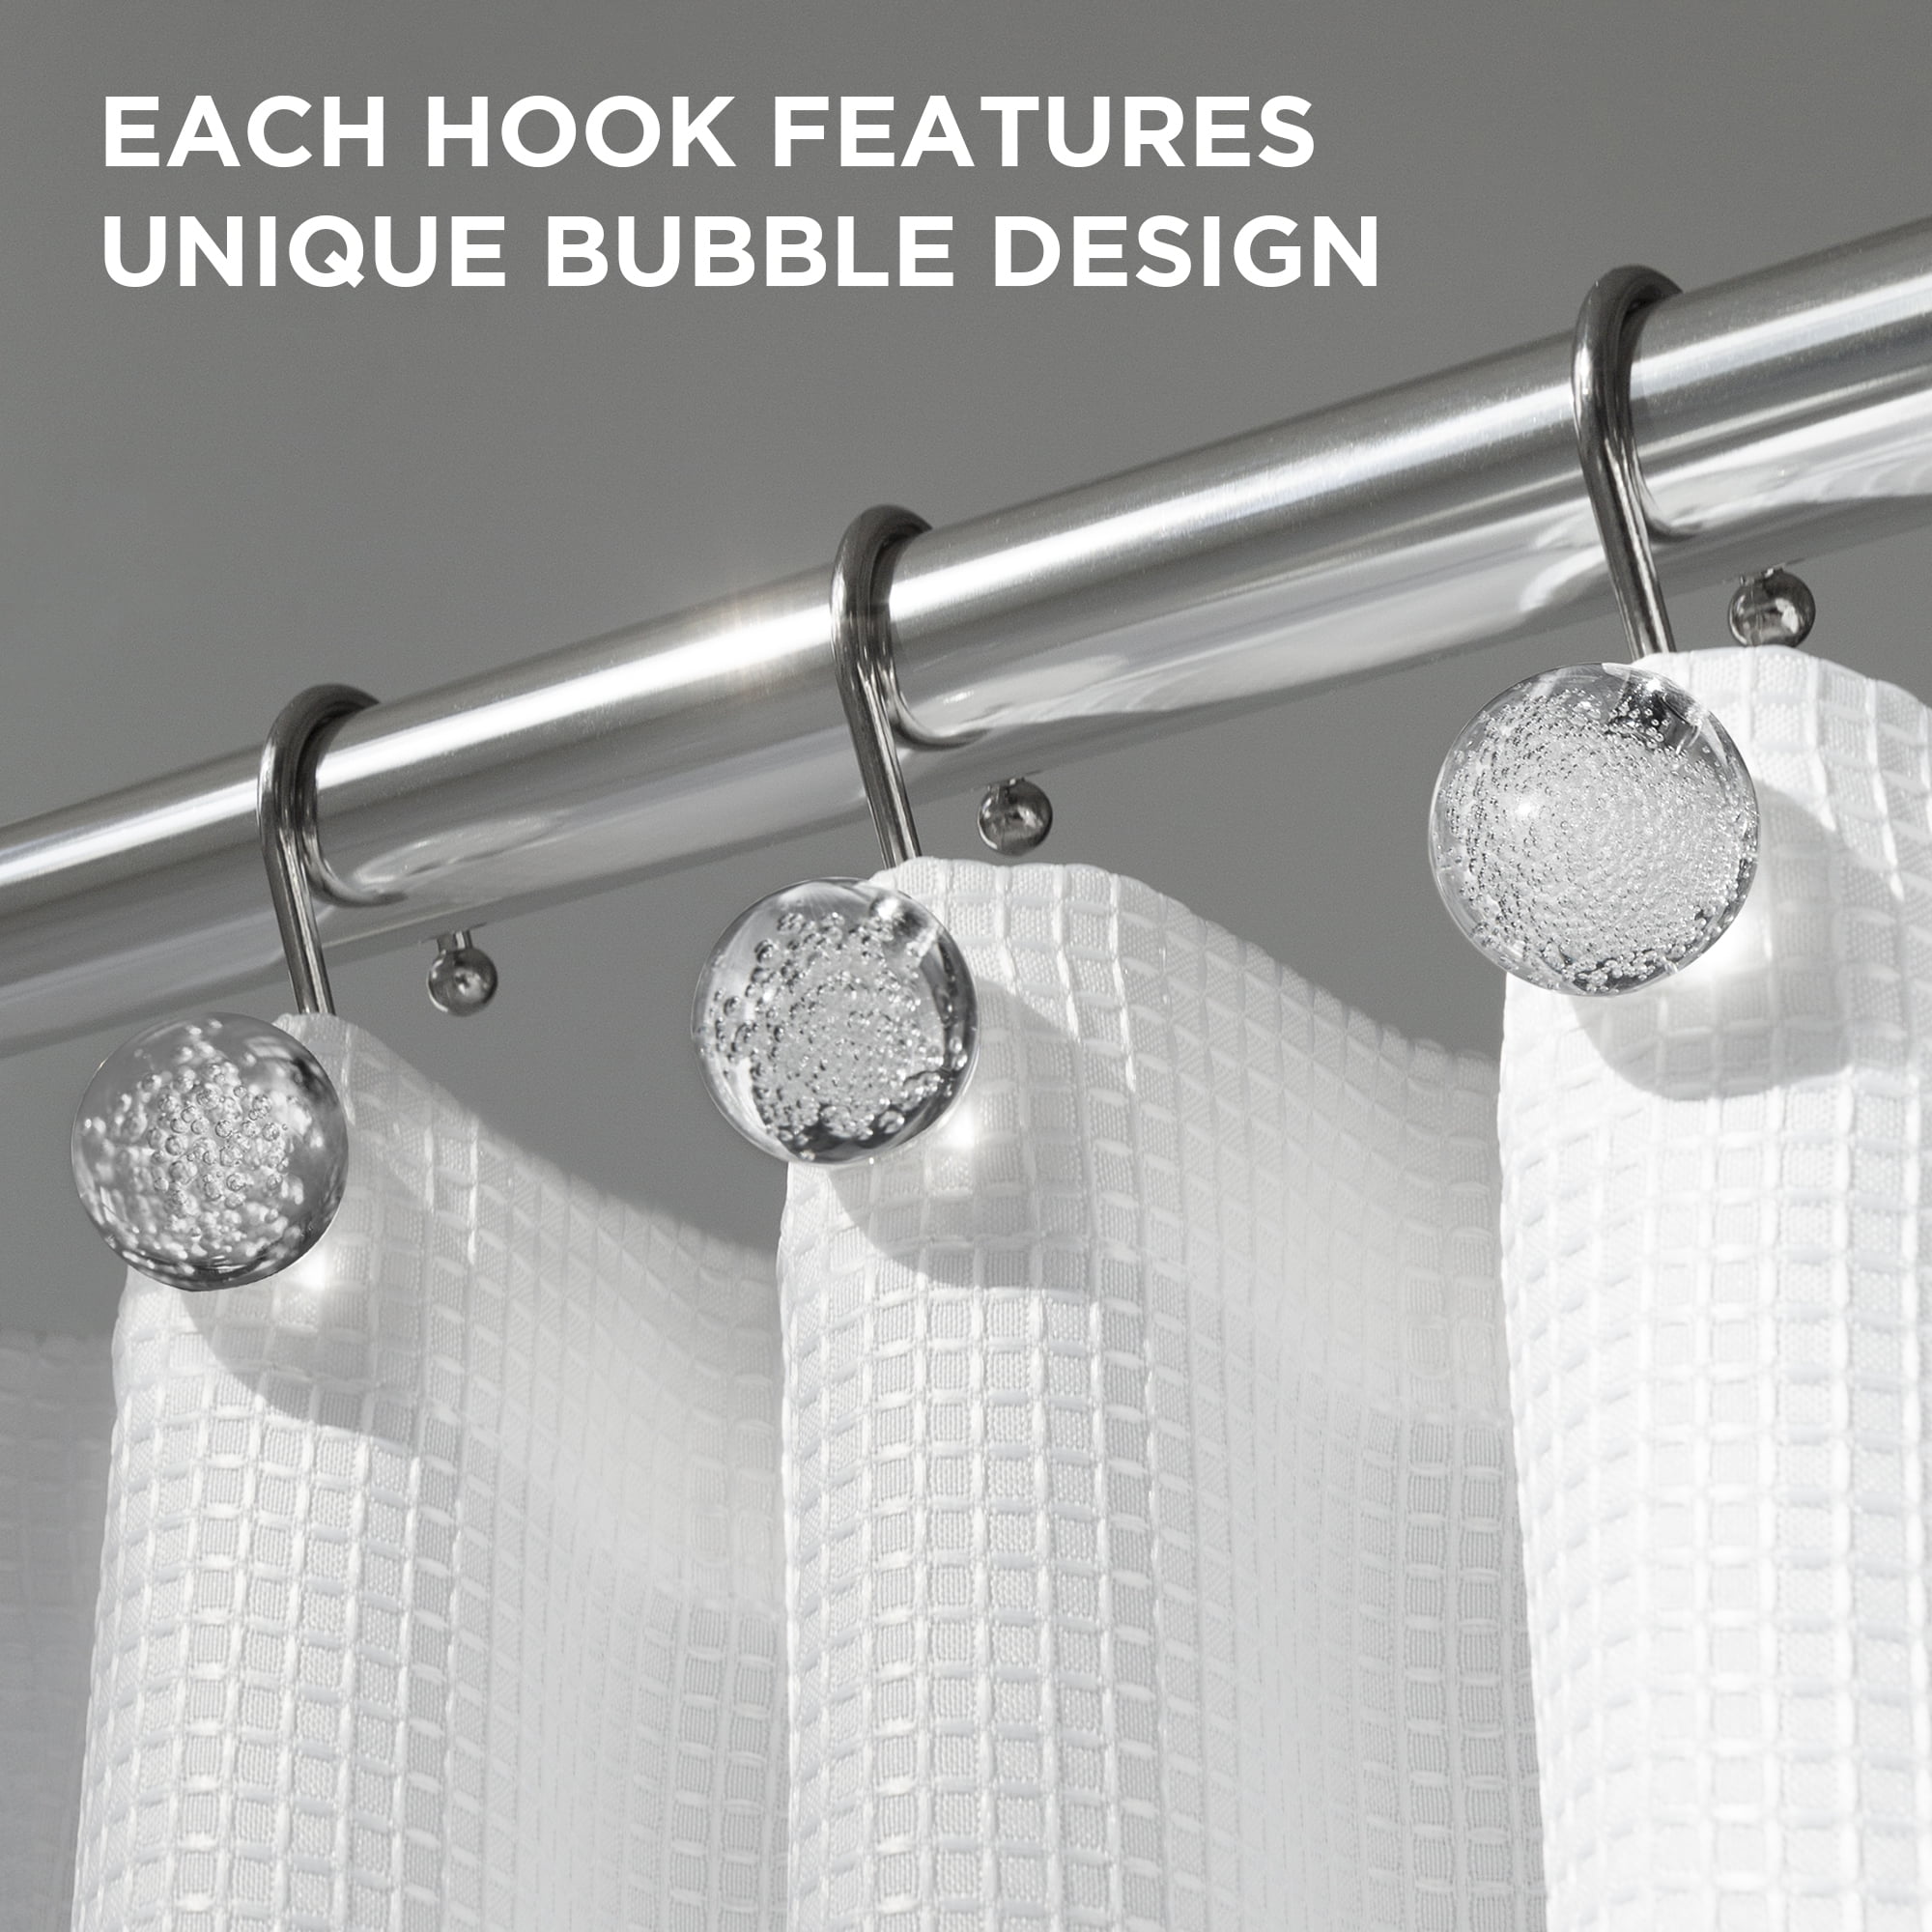 The Genius Way To Use Shower Hooks To Store Your Cleaning Supplies